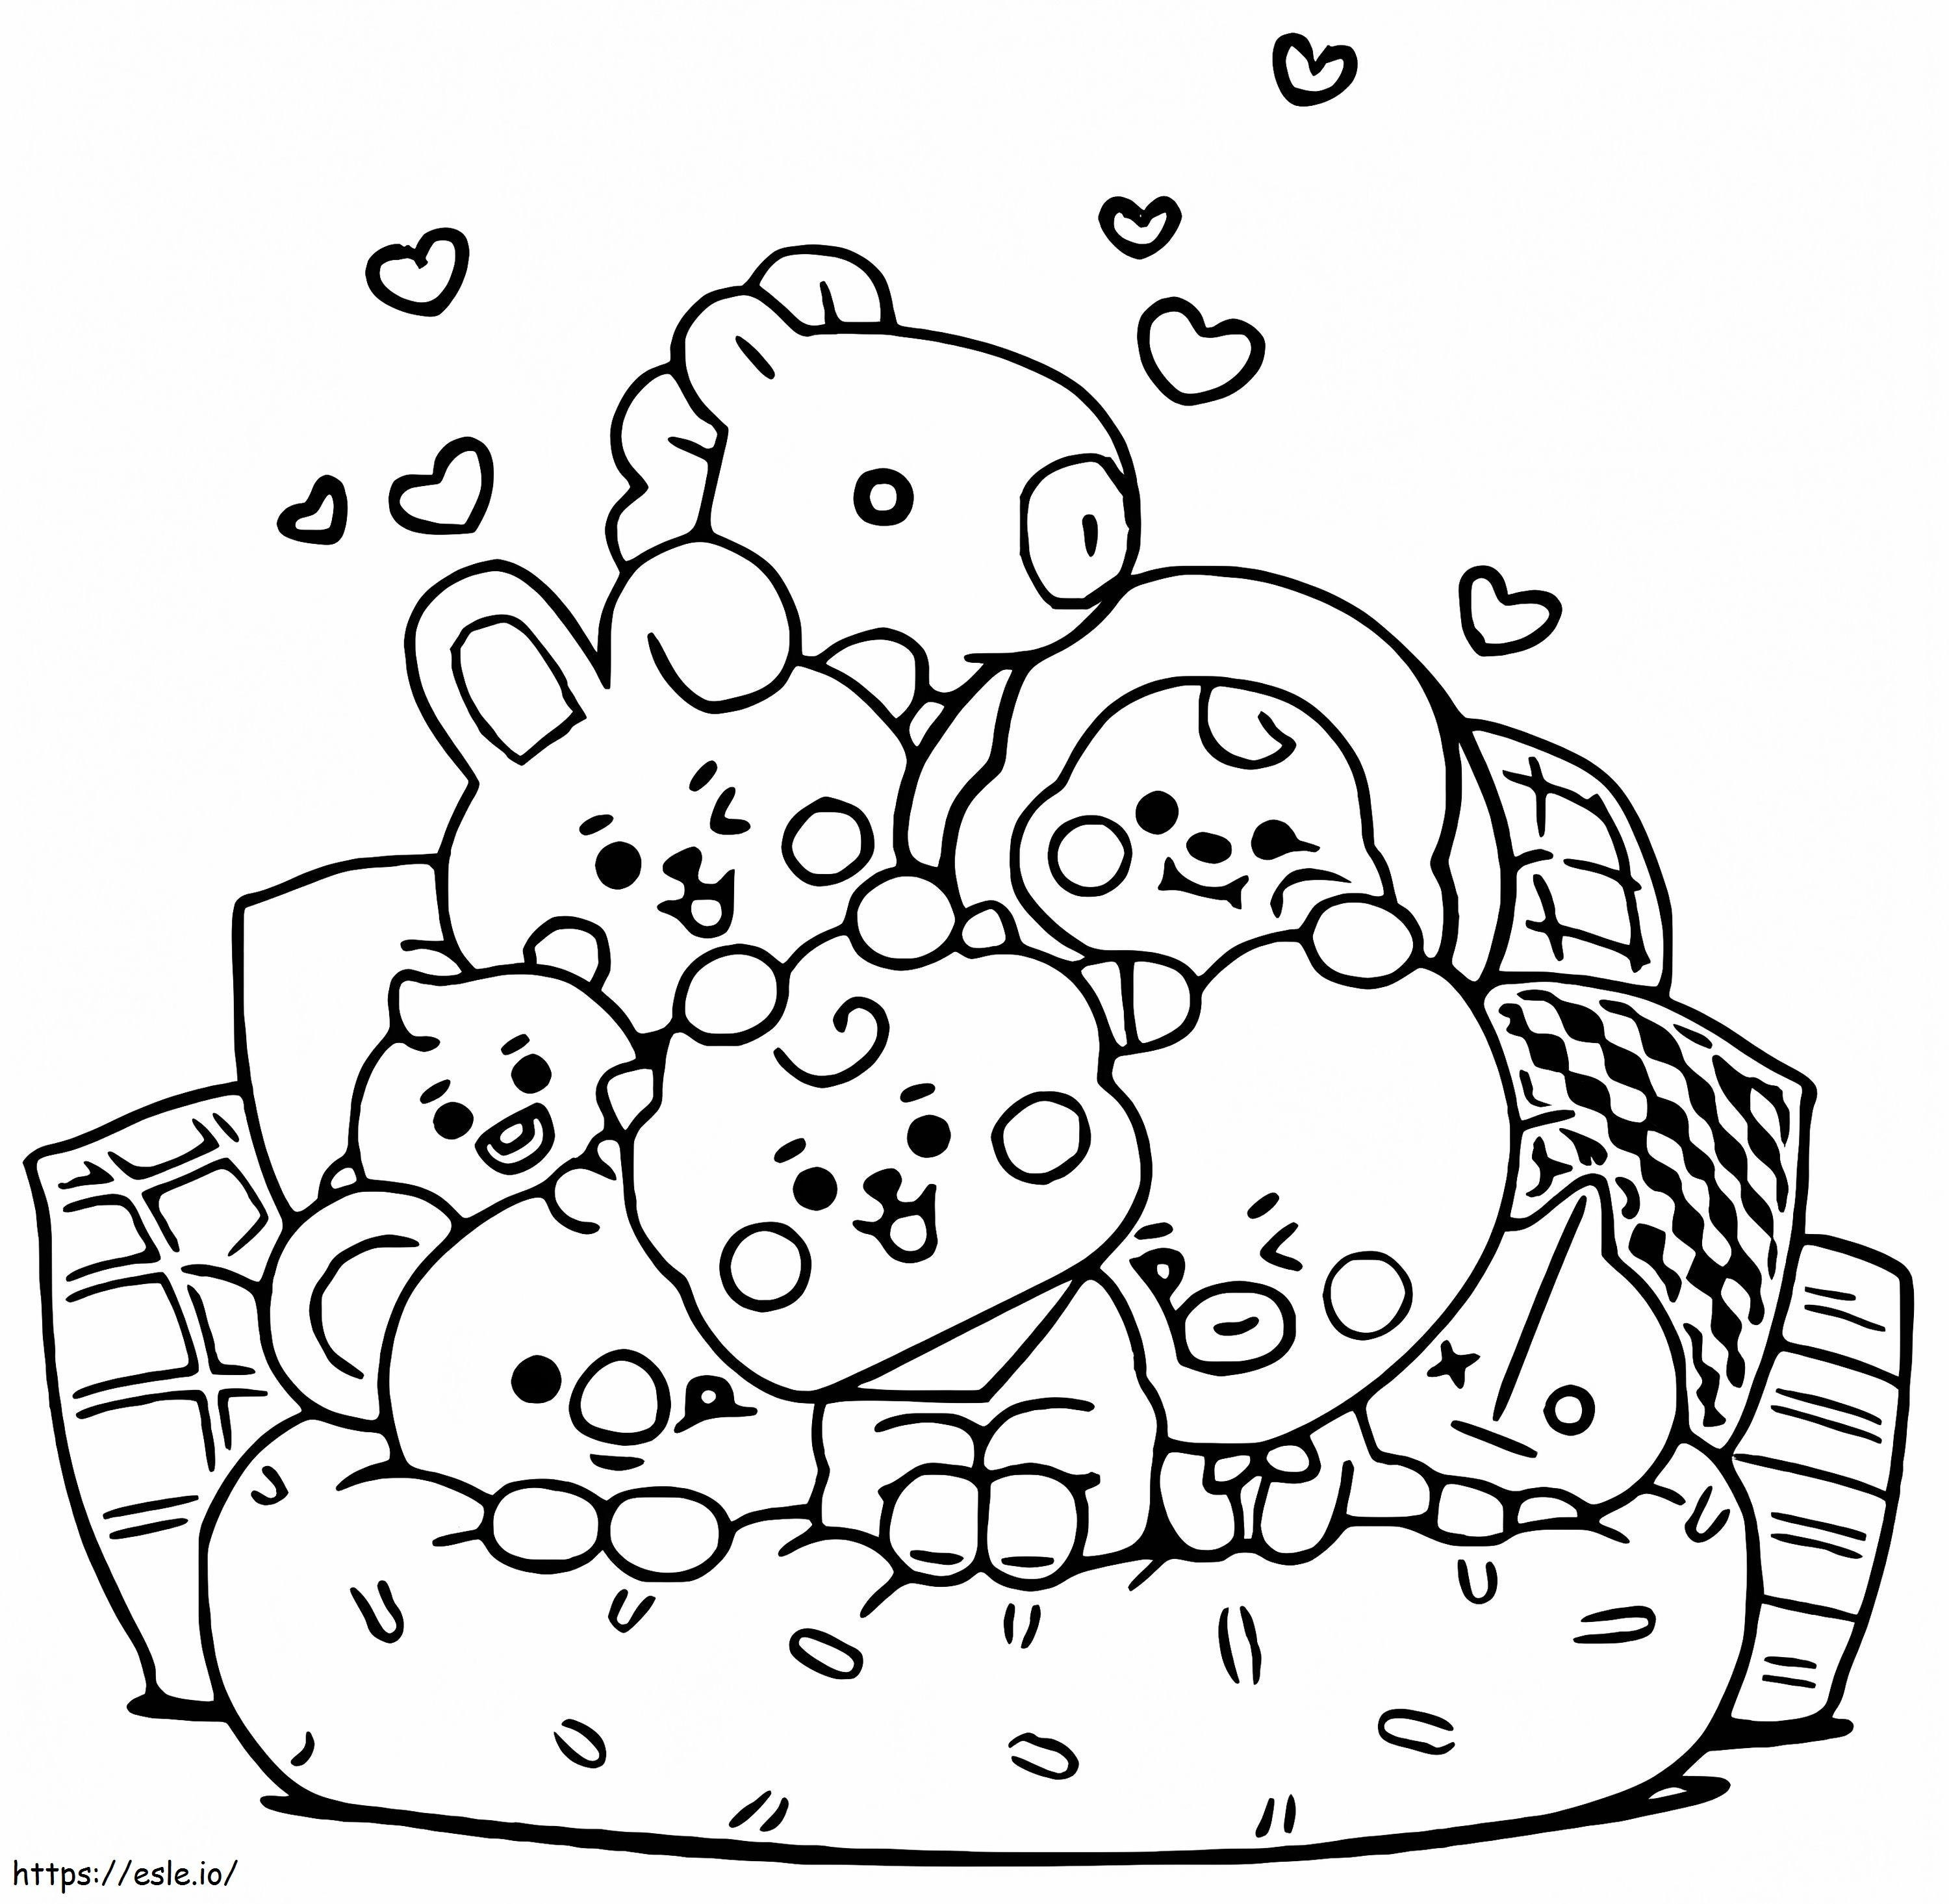 Cute BT21 coloring page